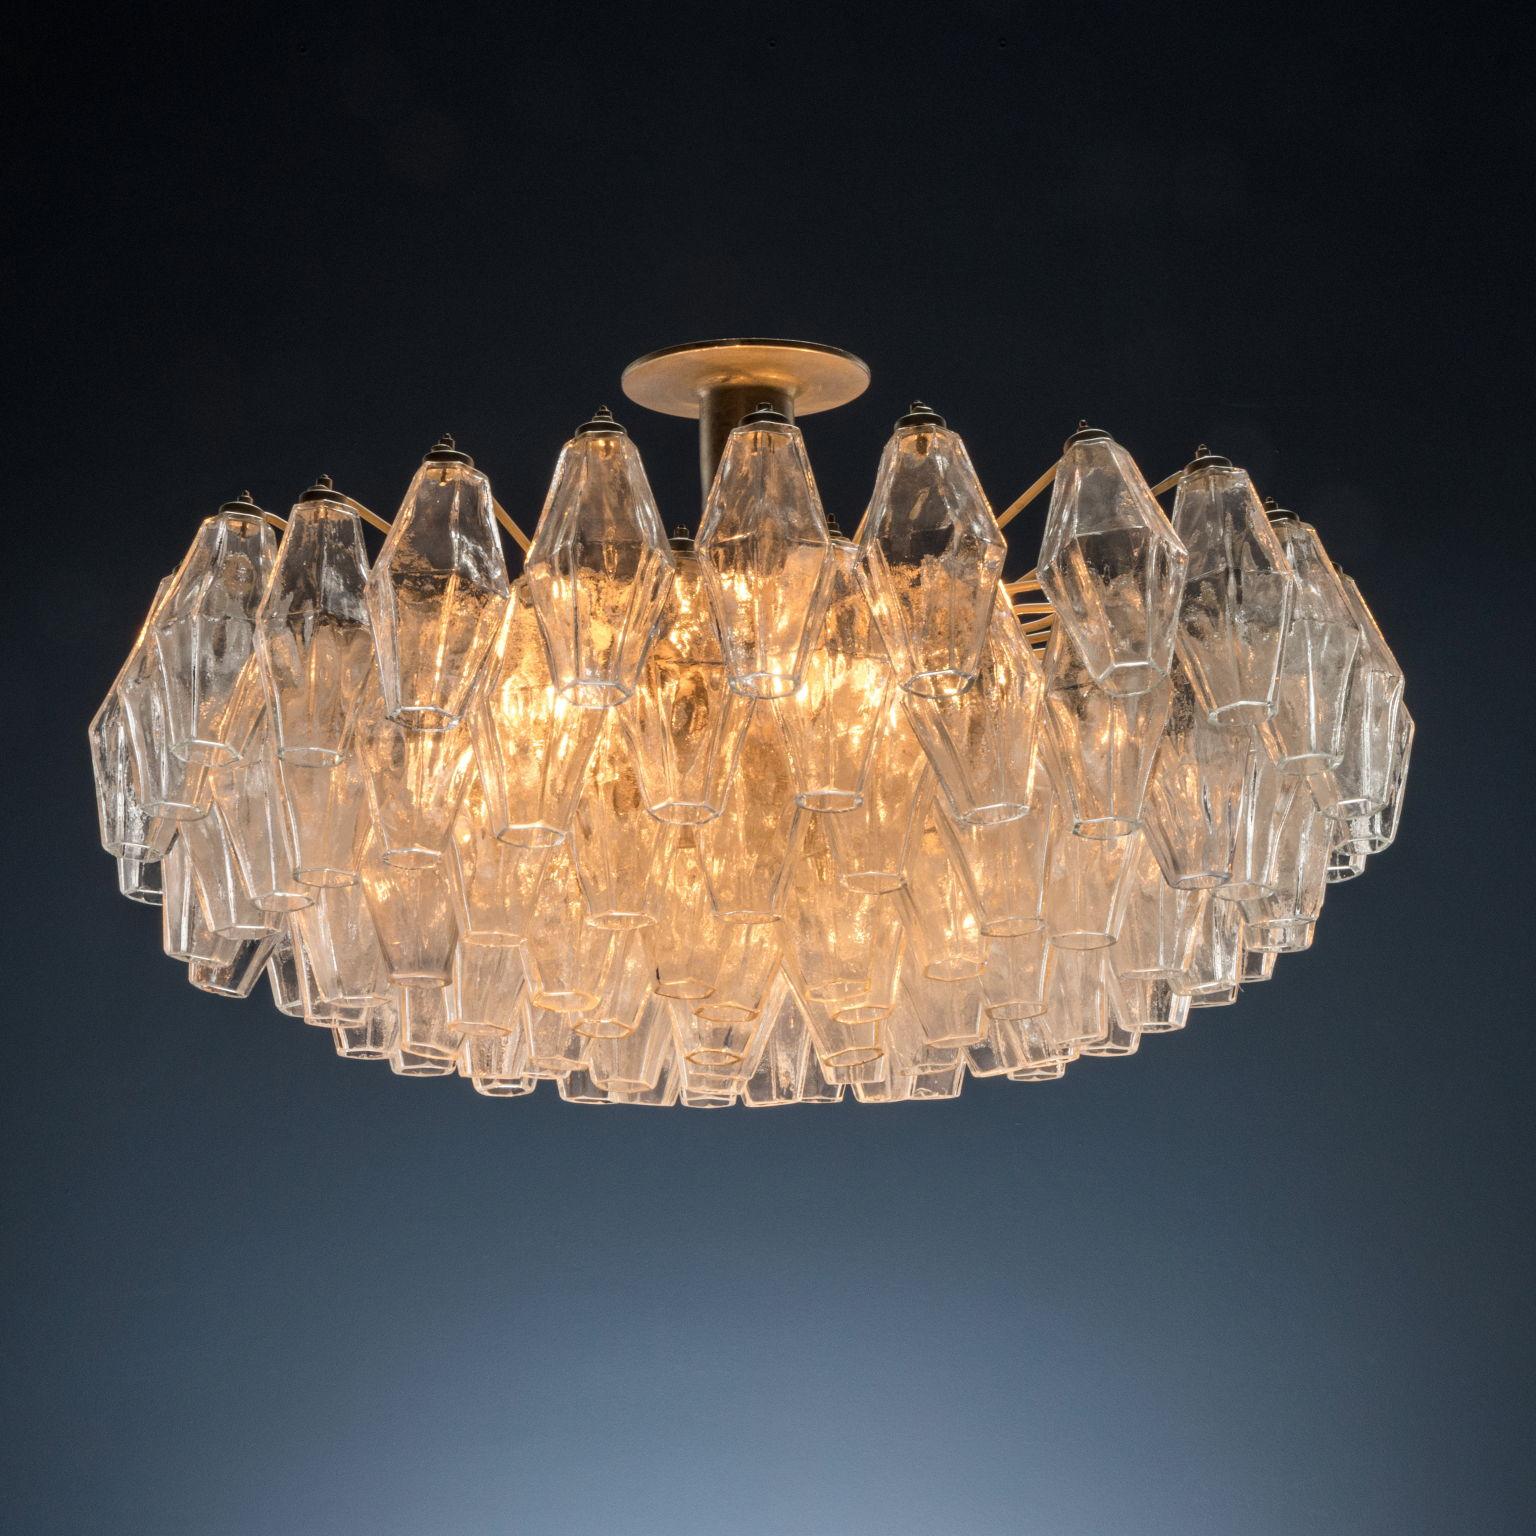 Suspension lamp by Venini for the Poliedri series with metal structure and Murano glass elements from the 1960s.